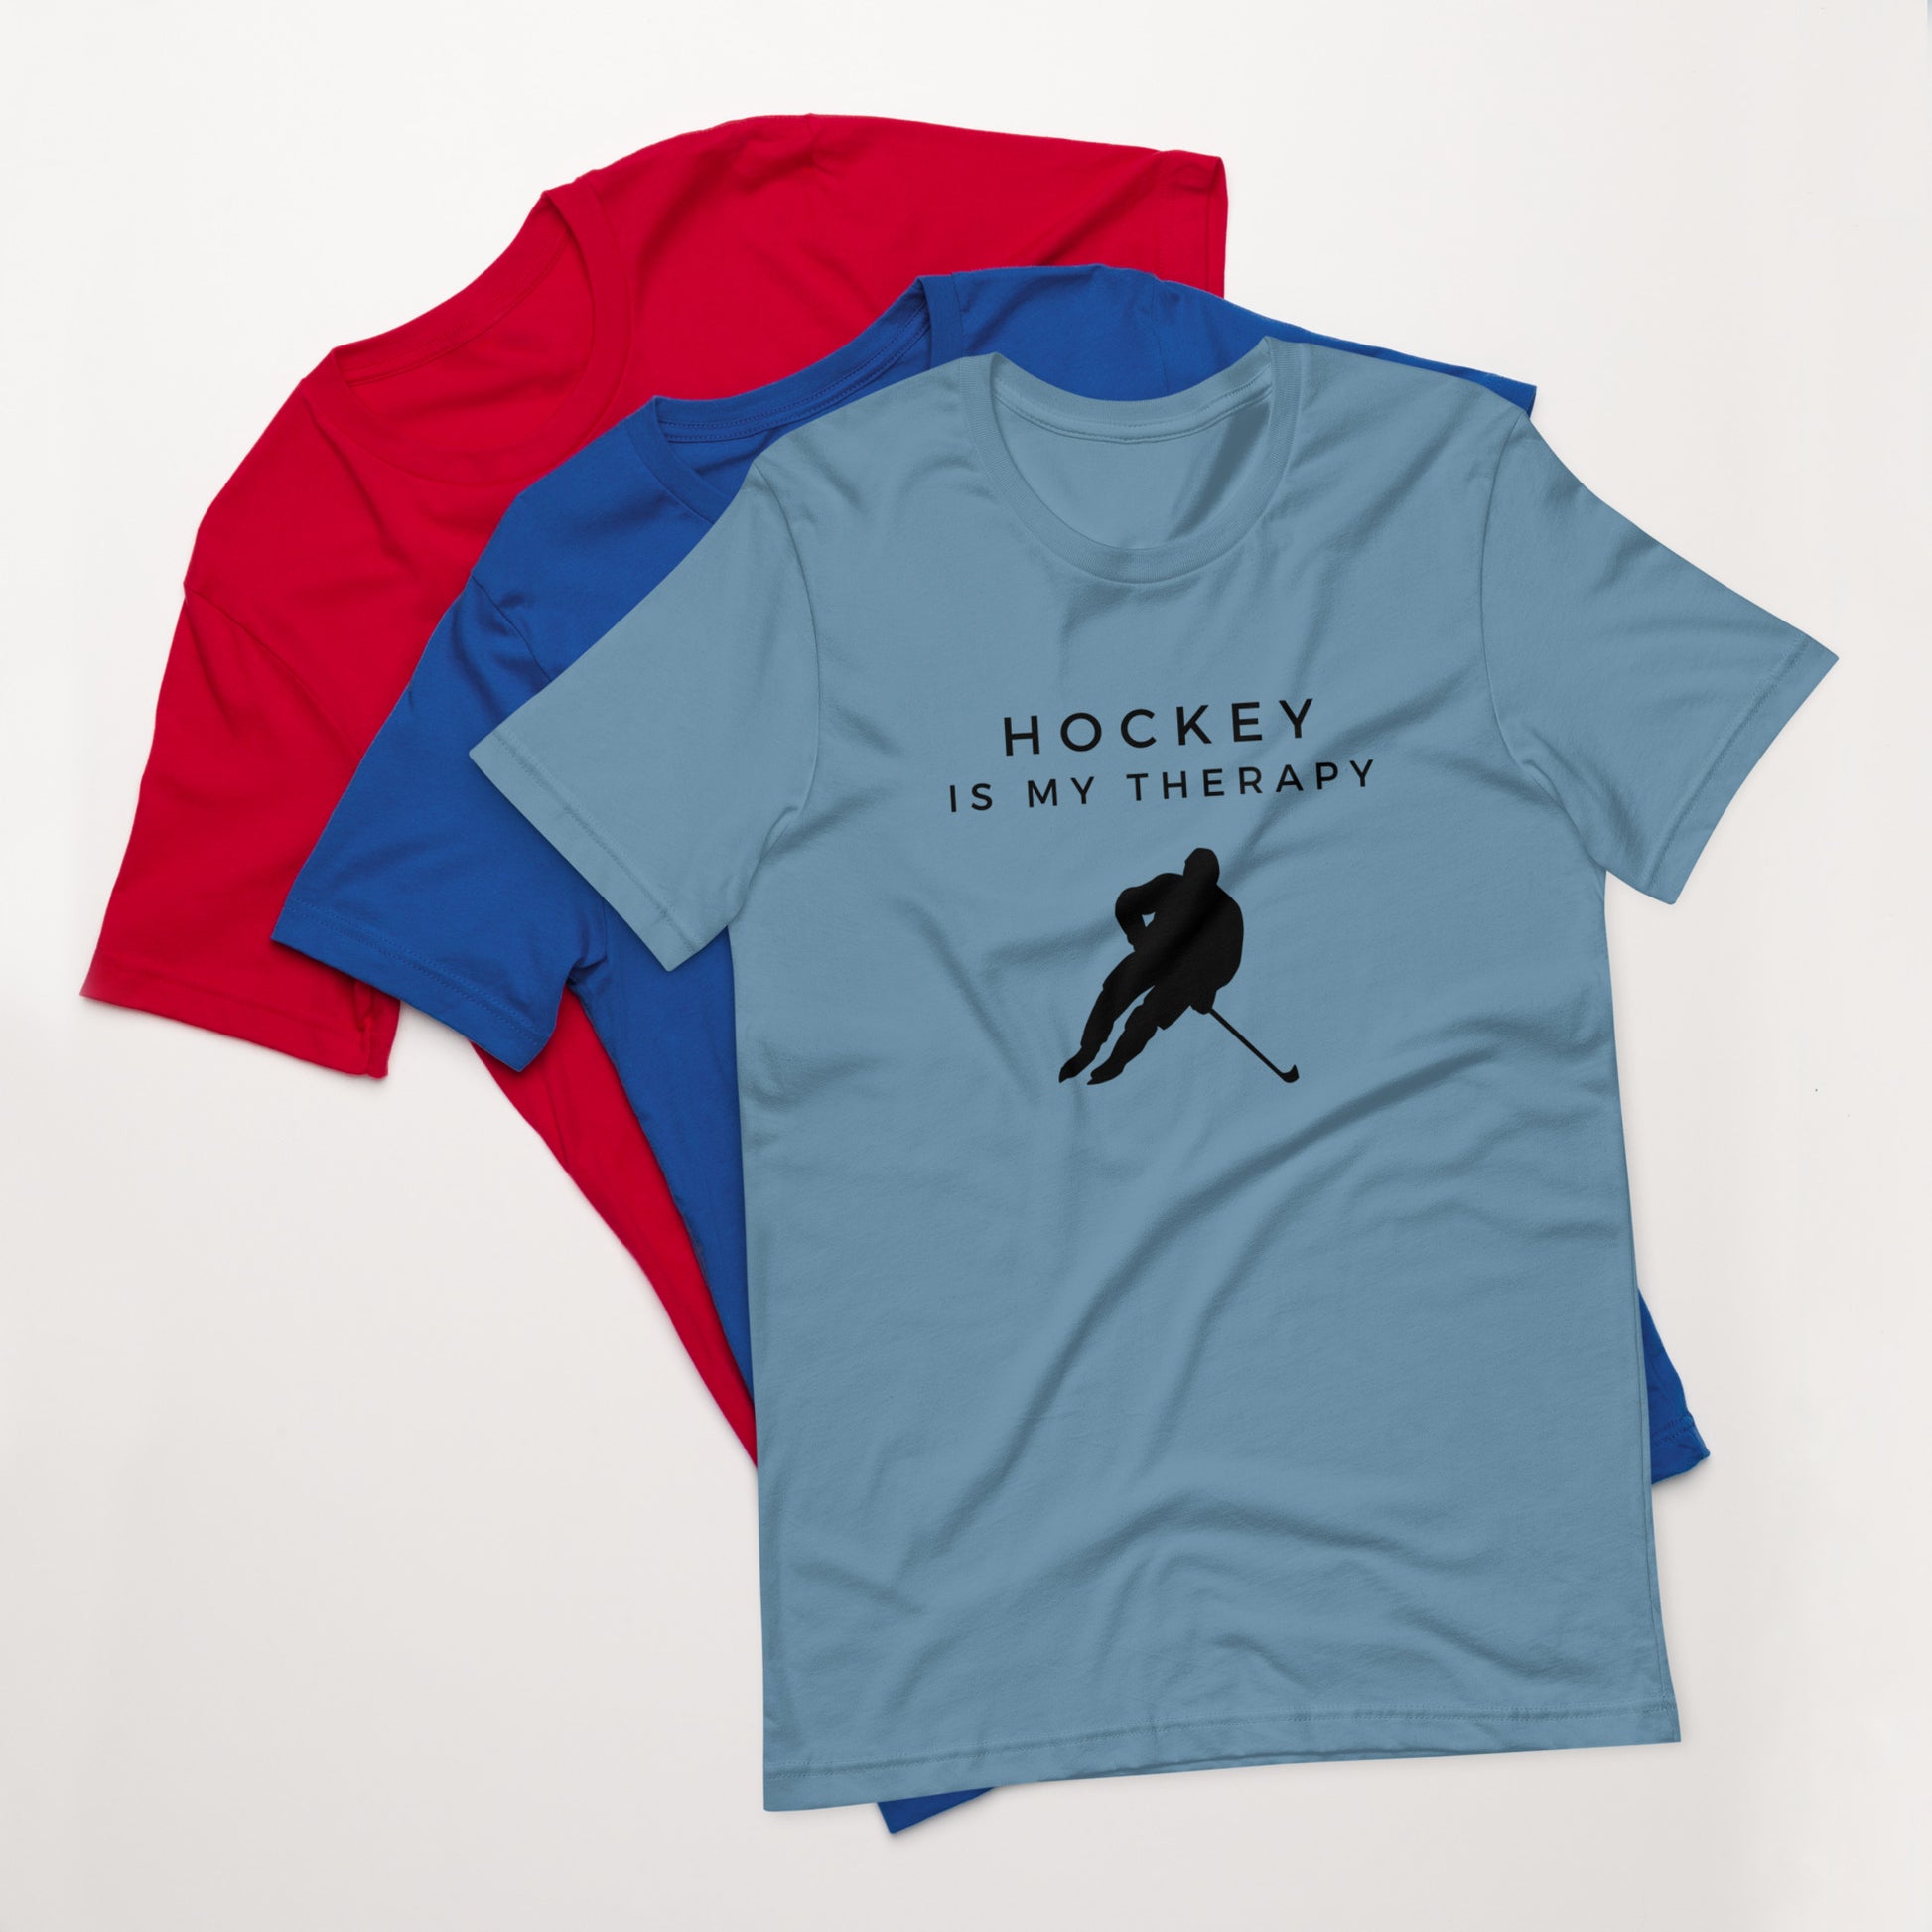 "Hockey Is My Therapy" T-Shirt - Weave Got Gifts - Unique Gifts You Won’t Find Anywhere Else!